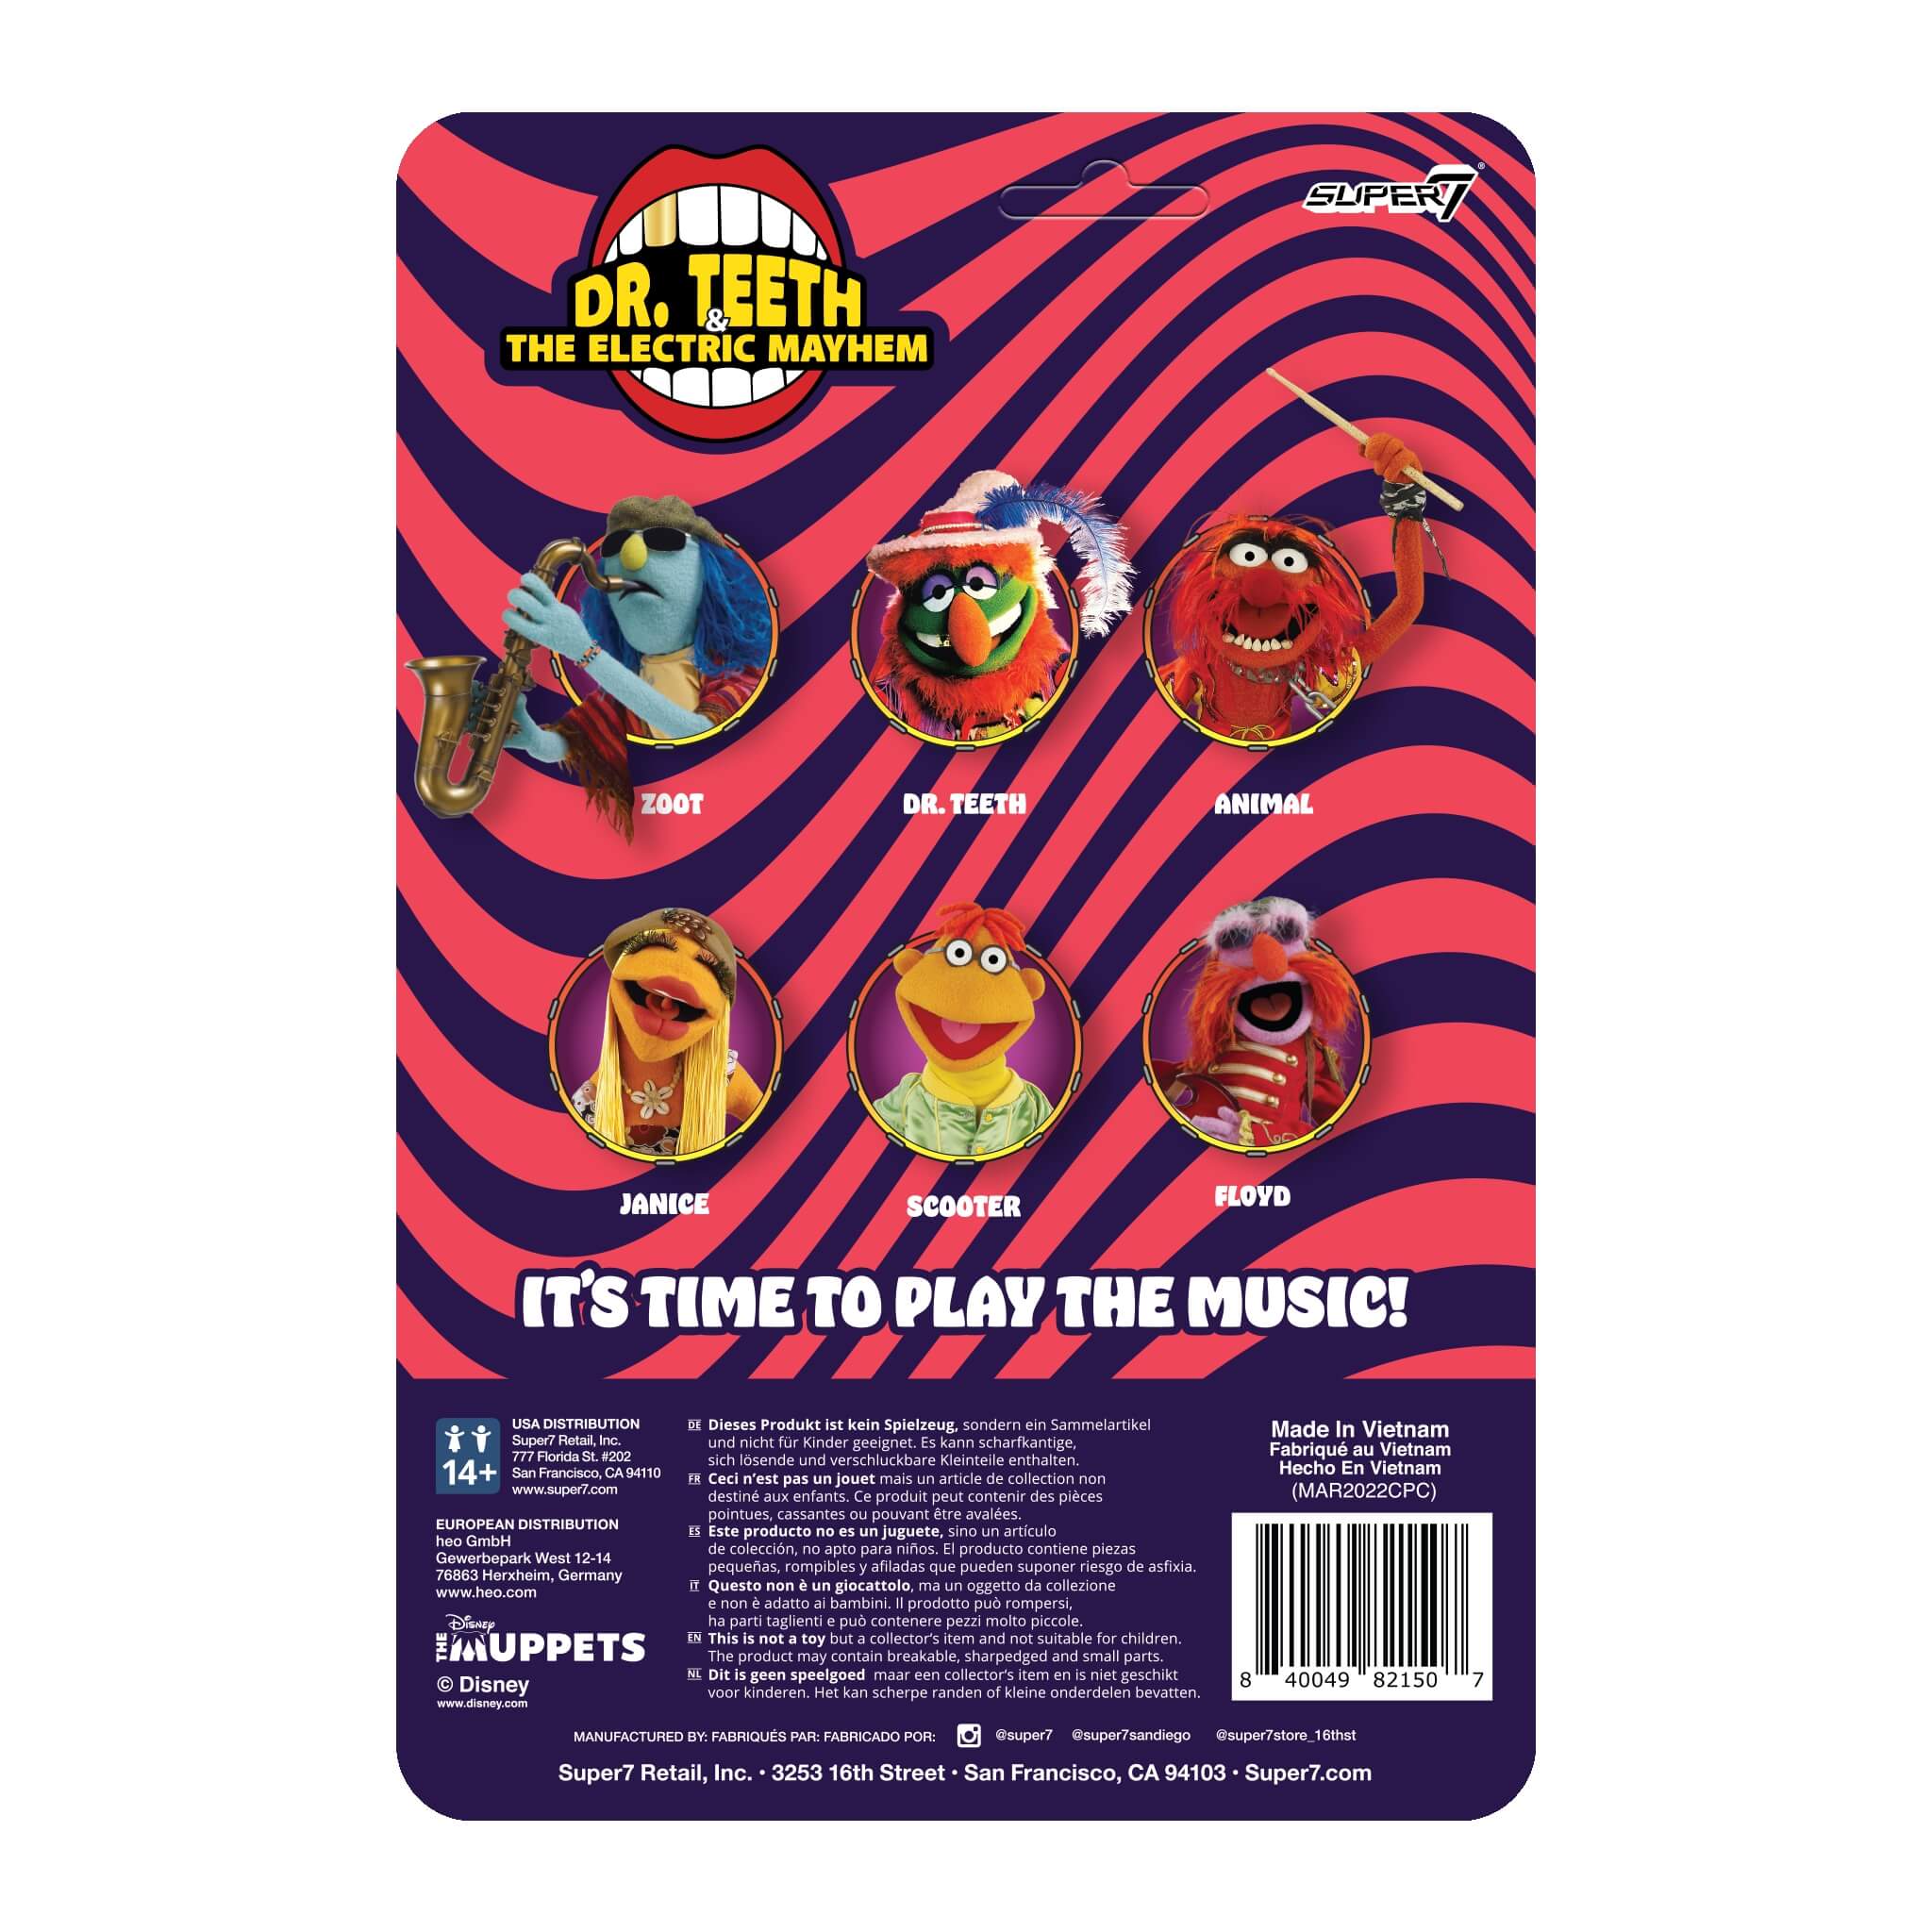 The Muppets ReAction Figures Wave 1  - Electric Mayhem Band - Floyd